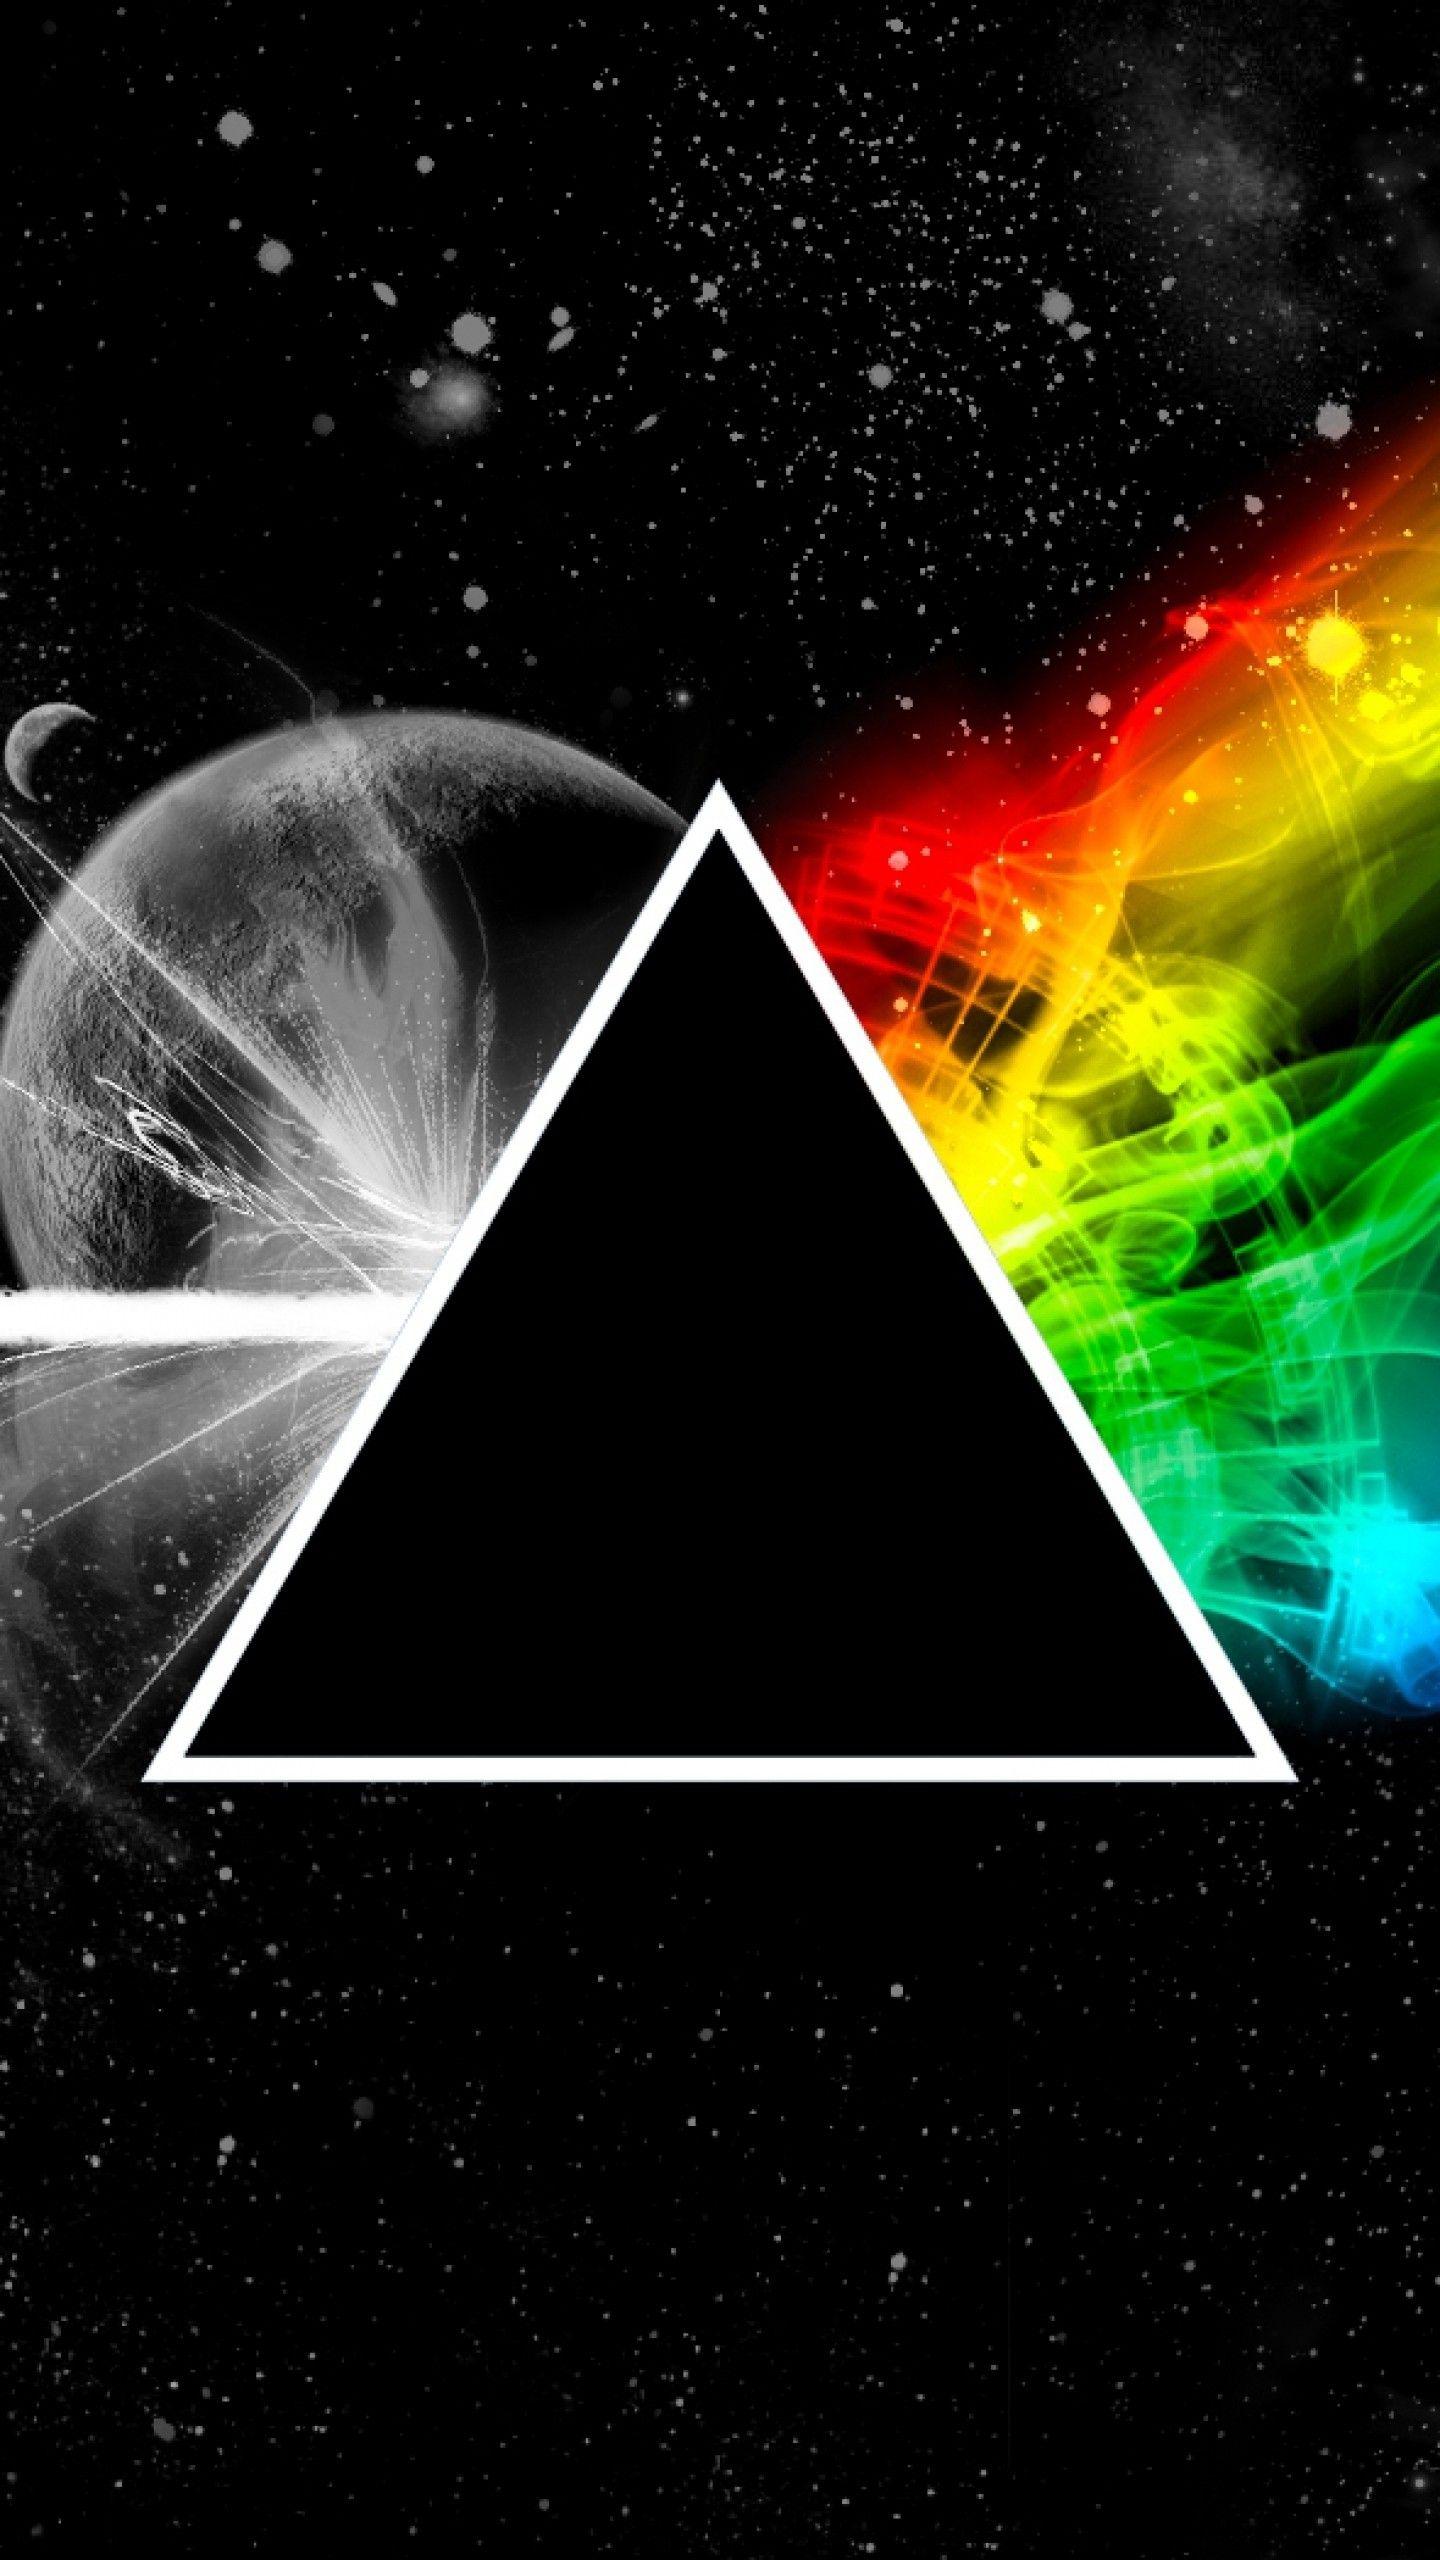 Preview wallpaper pink floyd, triangle, space, planet, colors 1440x2560. Pink floyd wallpaper, Pink floyd art, Nature iphone wallpaper